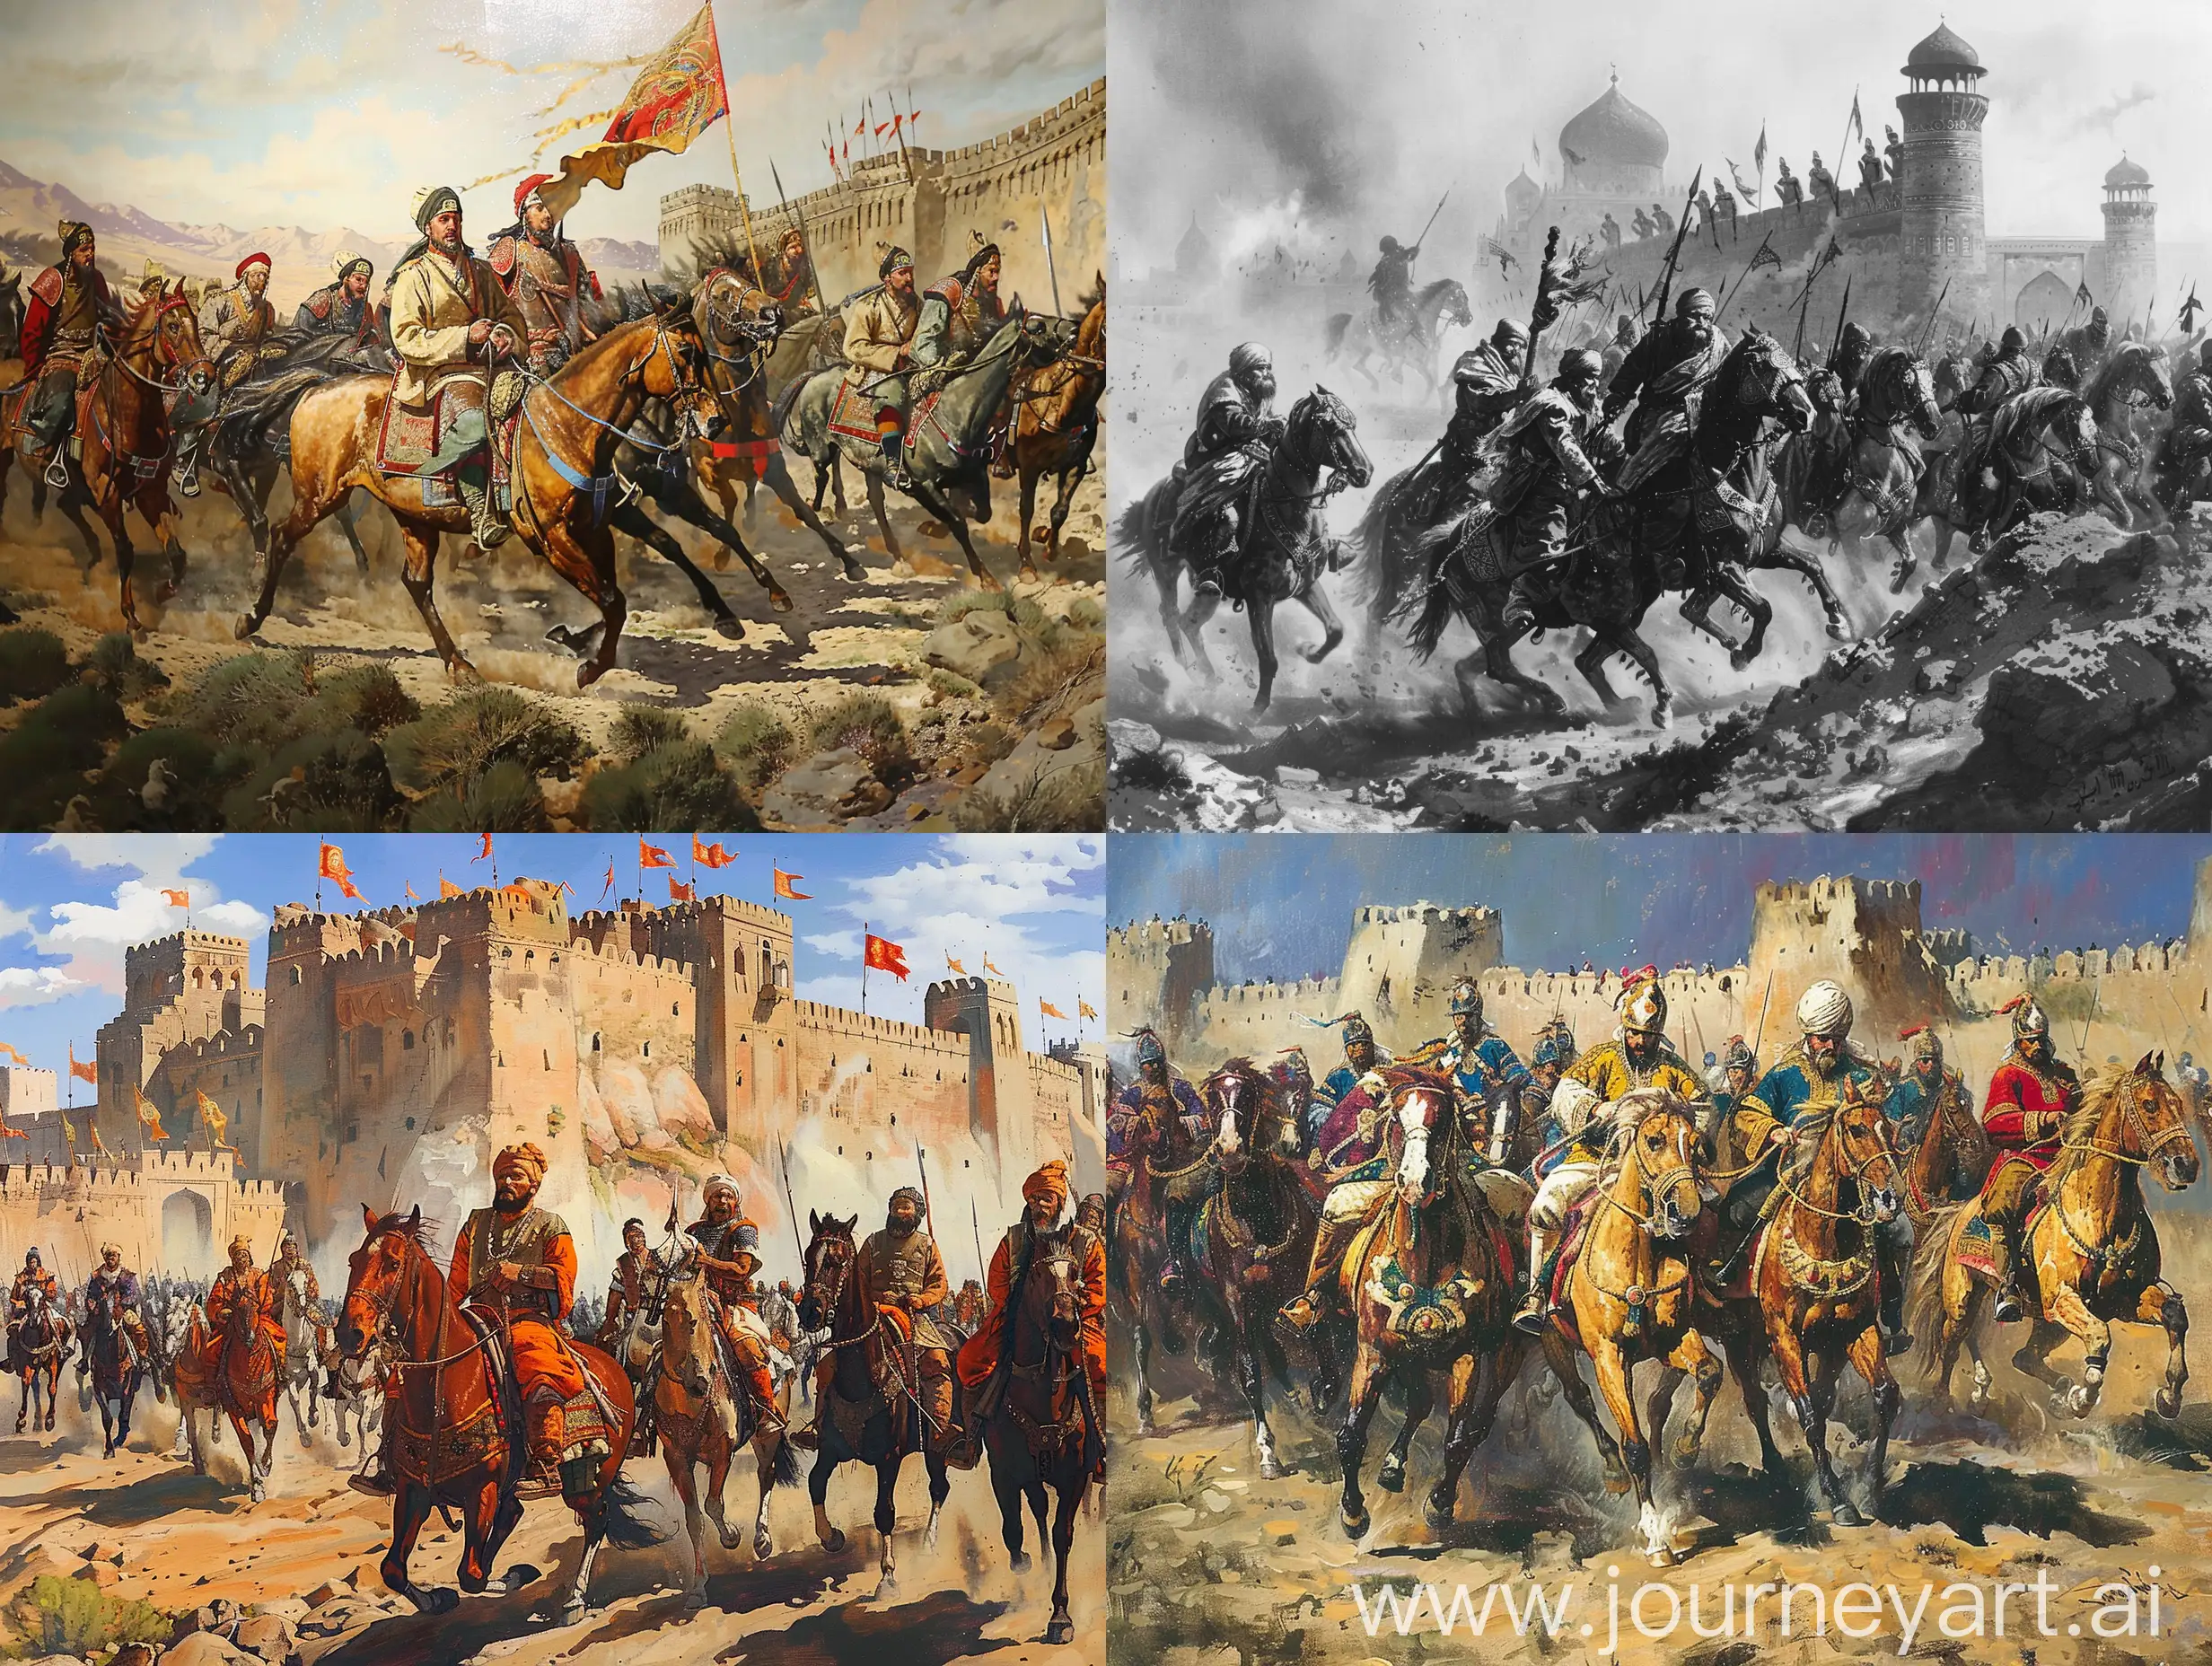 High quality. At the same time, there are various sources indicating that similar massacres of Mongols took place at different times and in different places. For example, Christopher Beckwith finds that the Mongols in Samarkand sought help from the Eastern Mongols under Kül Tegin to counter Arab attacks. However, after the defeat of Kül Tegin, the Arab armies under Qutayba bin Muslim captured Samarkand and committed massacres in the city. This incident is another example of how bloody Qutayba bin Muslim's conquests and the process of Islamization in Central Asia was.